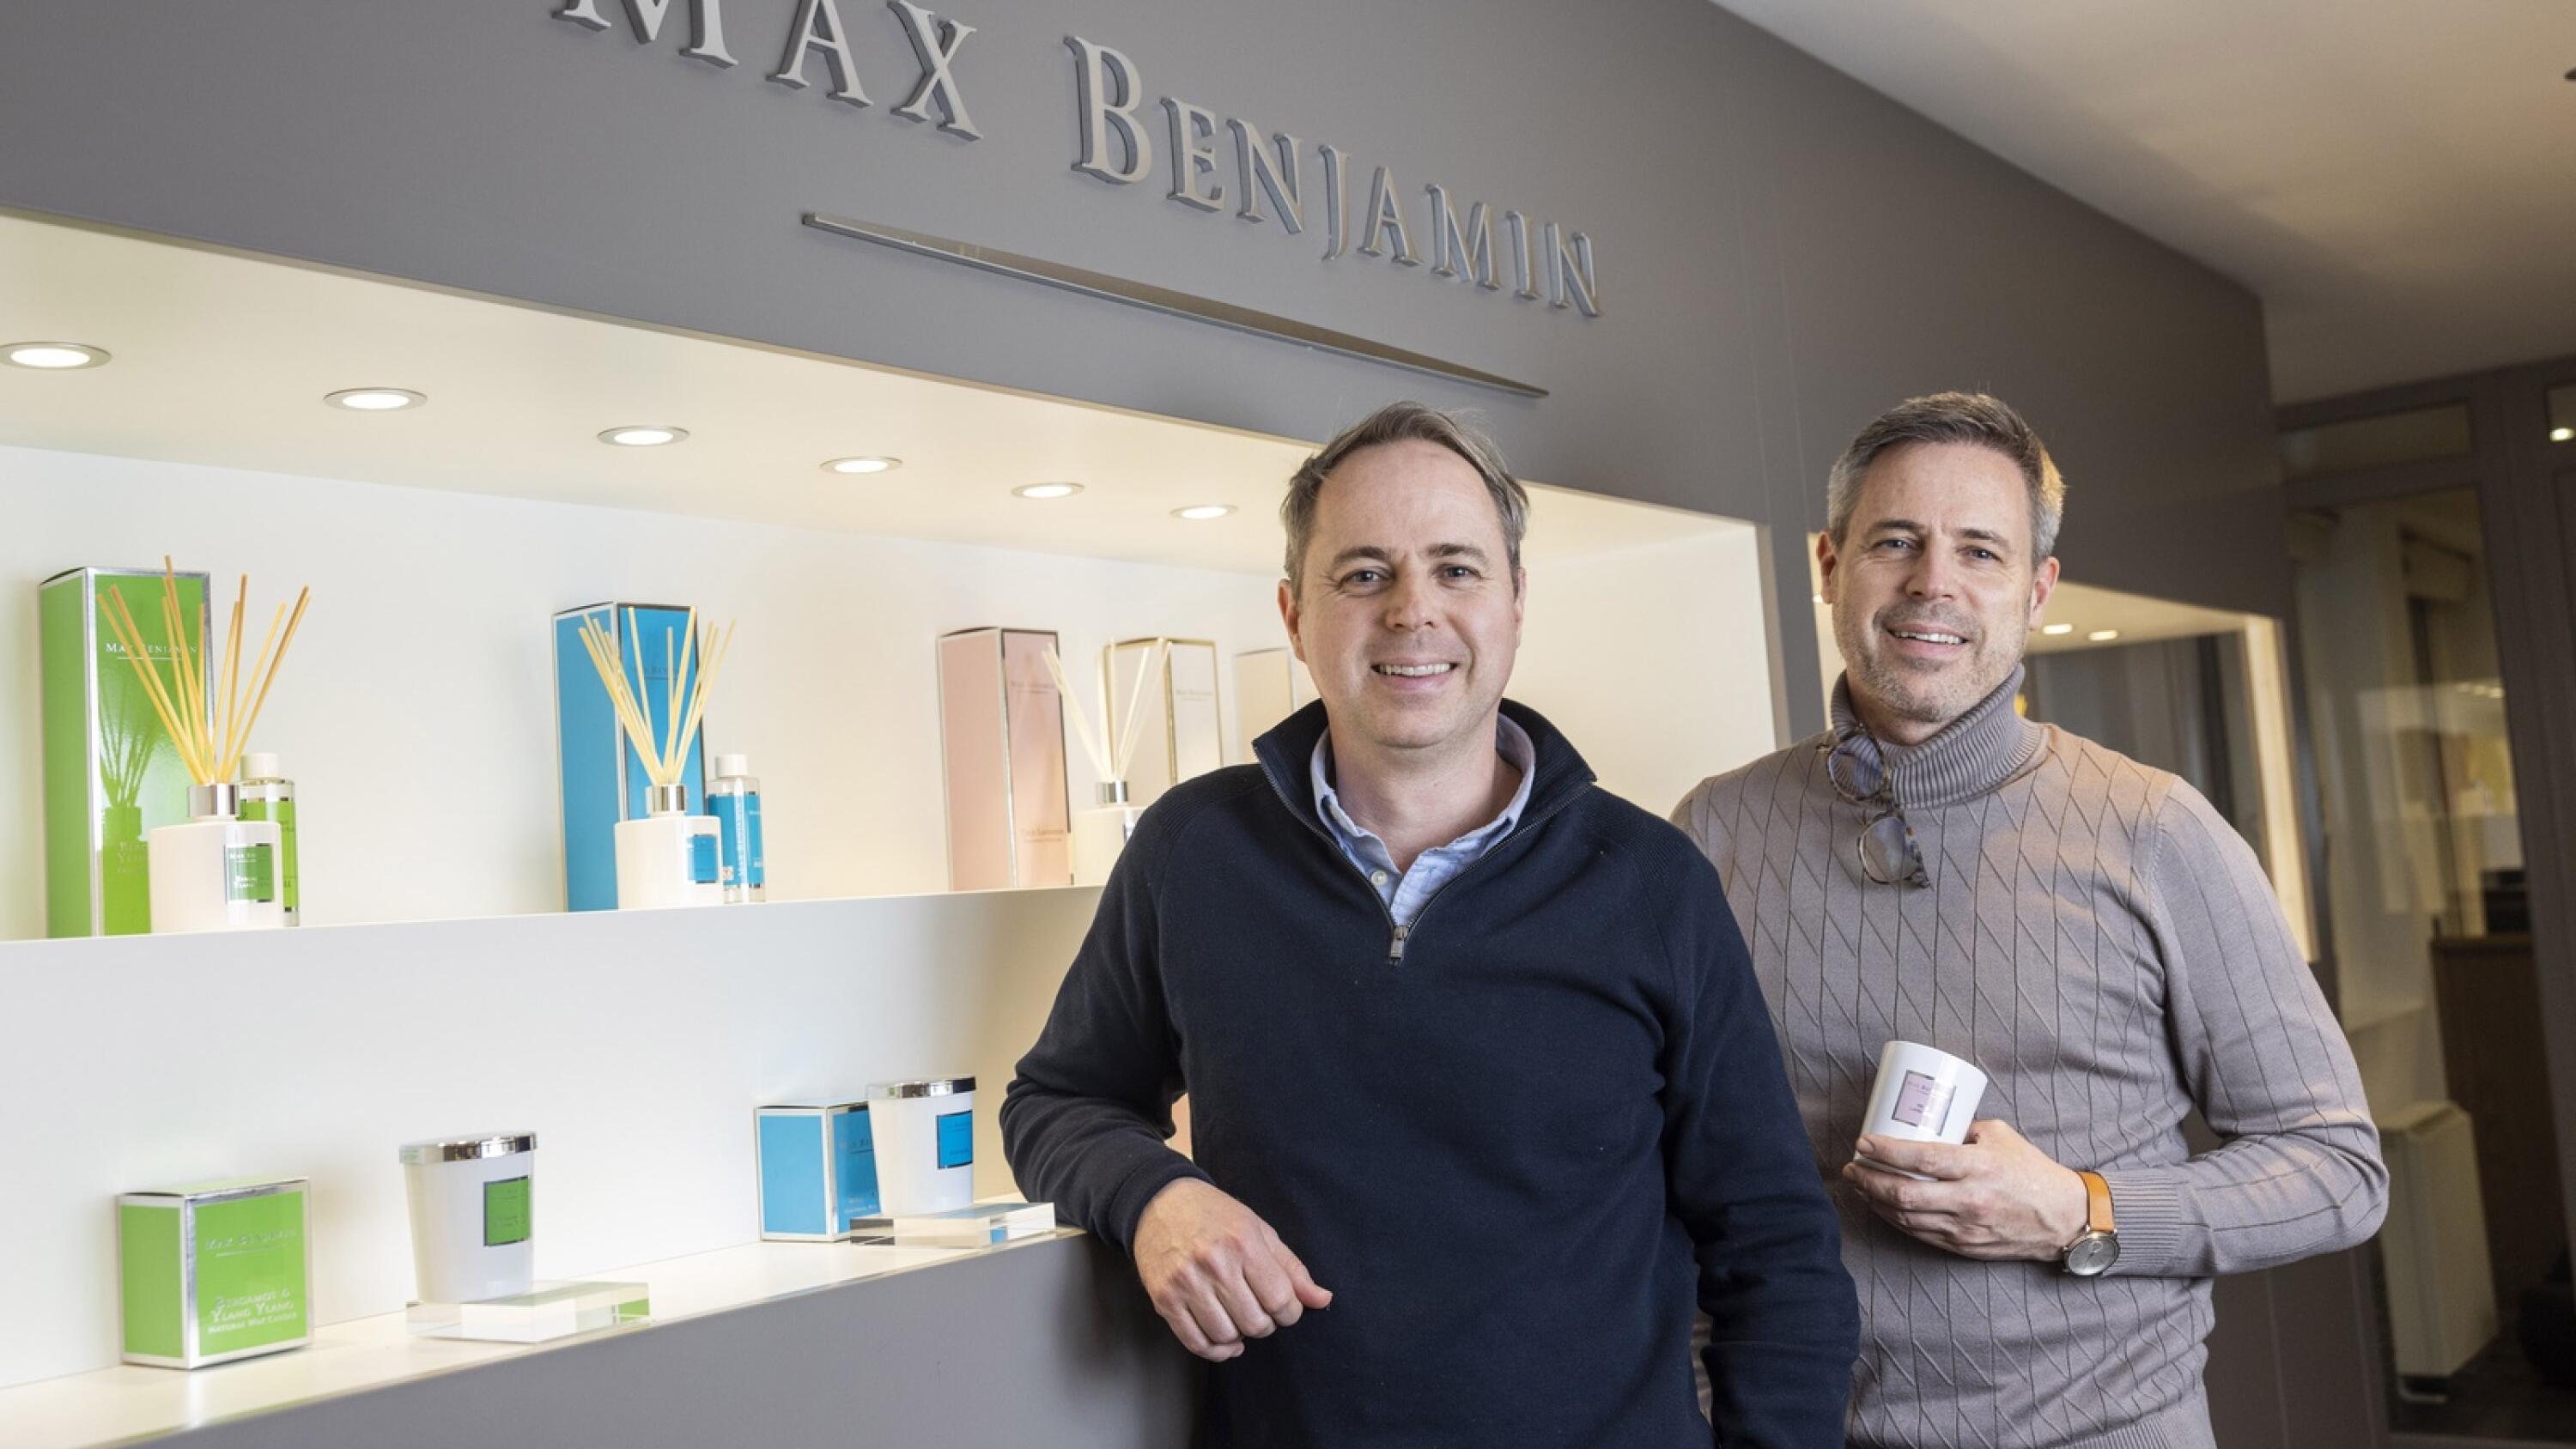 Family-run Wicklow fragrance company Max Benjamin targets US expansion